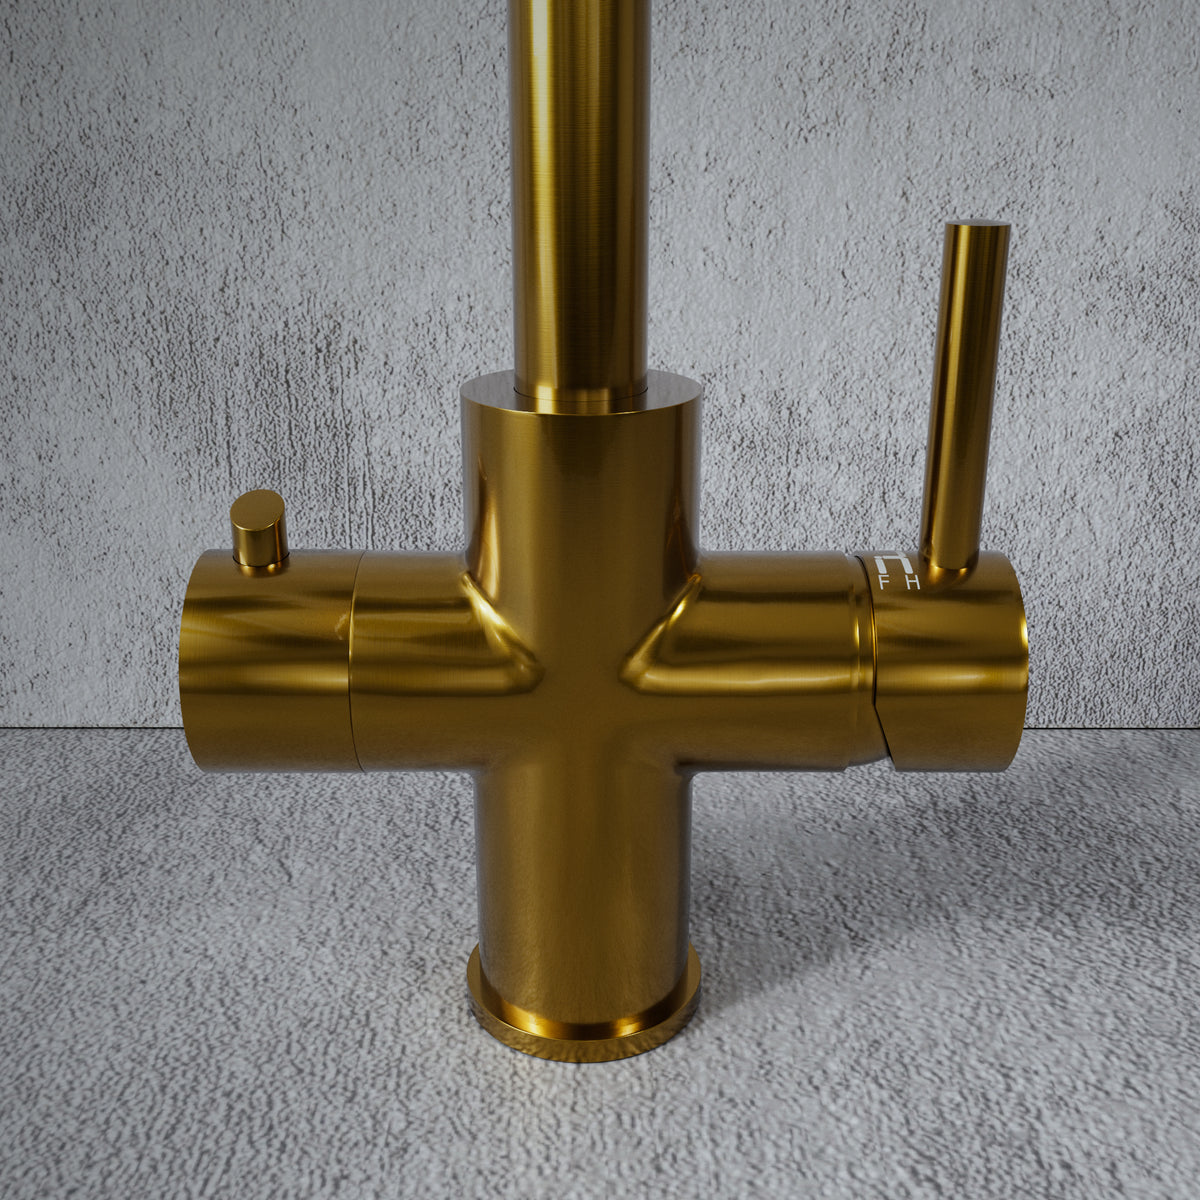 Design+ 4 in 1 Brushed Gold Boiling Hot Water Tap